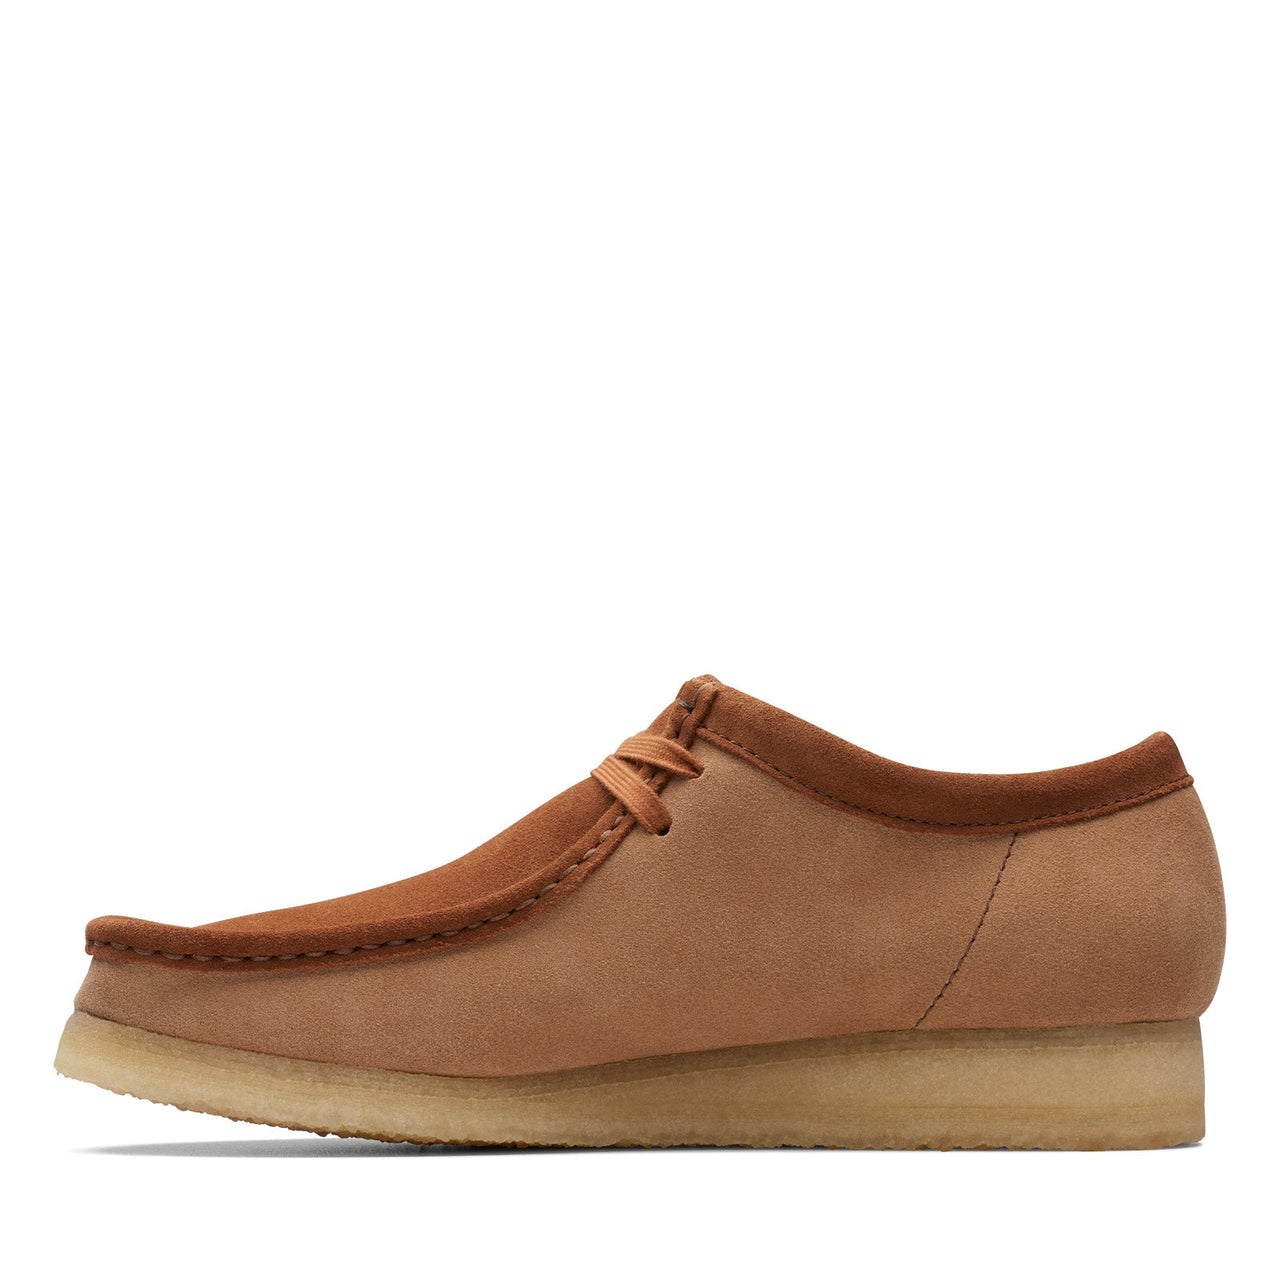 Clarks Wallabee 26172397 Mens Brown Suede Oxfords & Lace Ups Casual Shoes